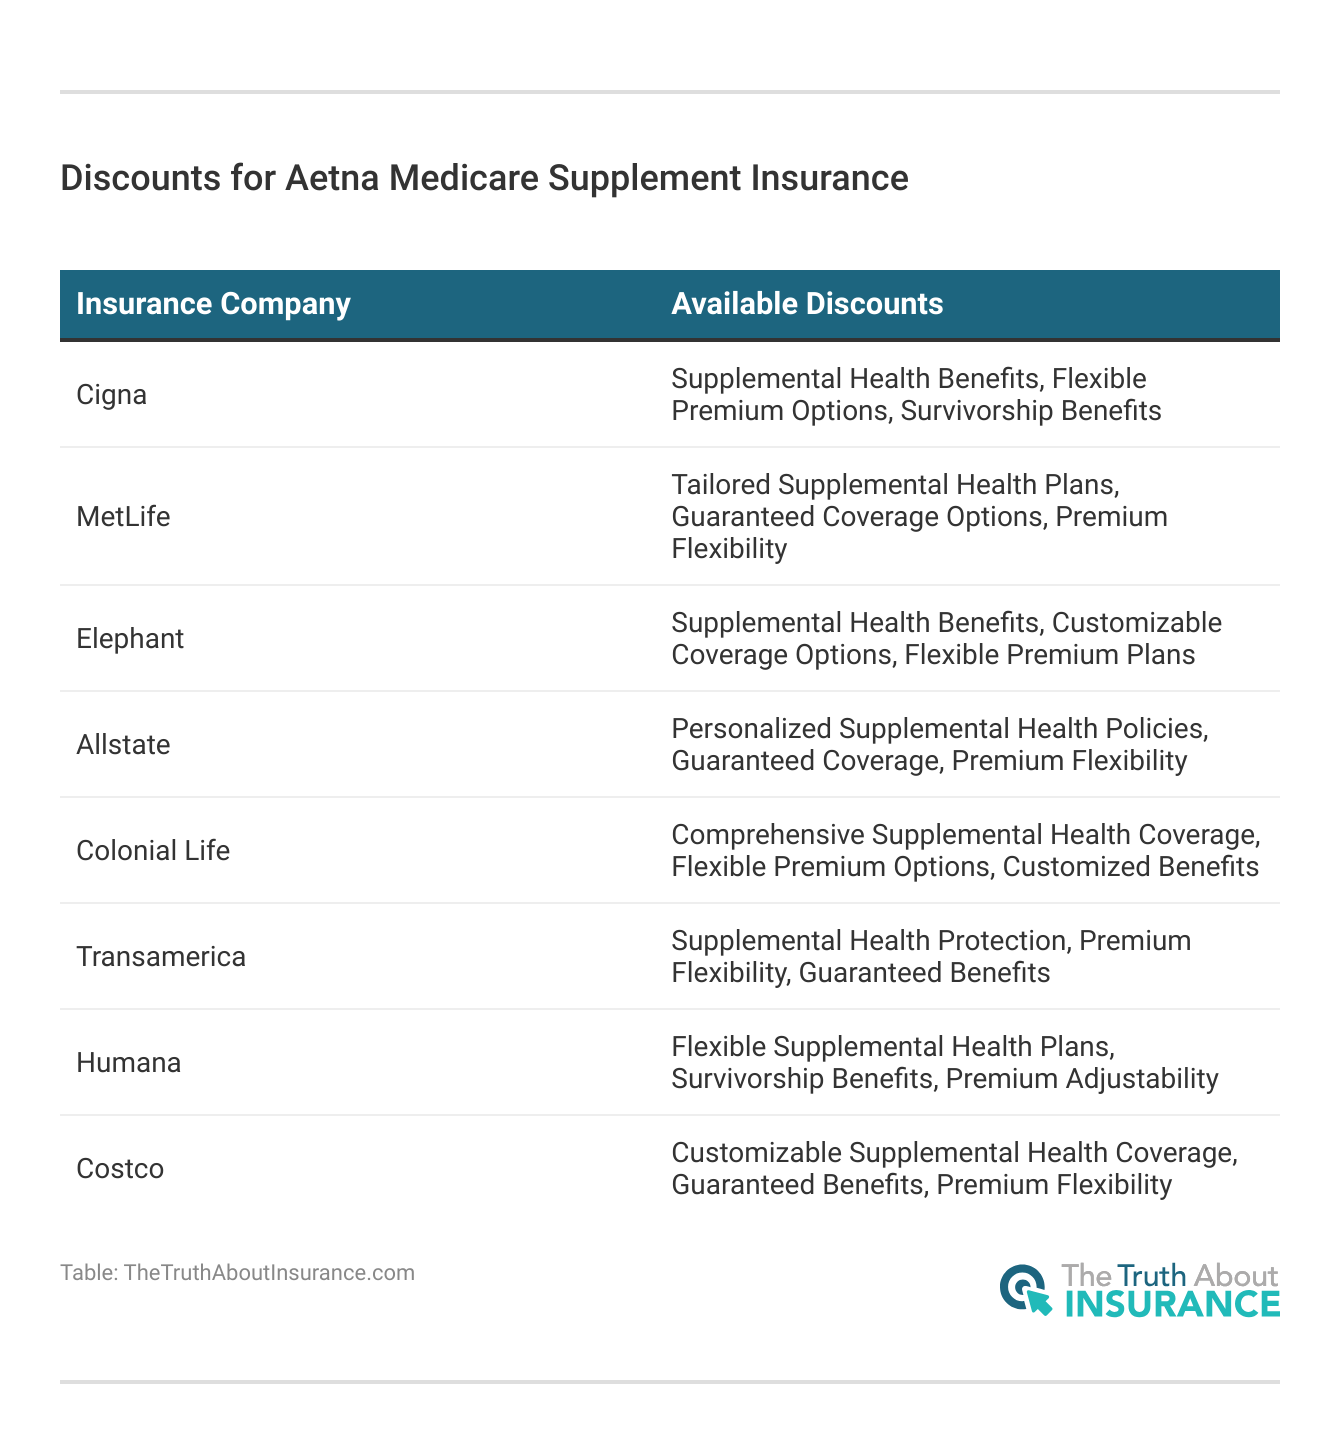 <h3>Discounts for Aetna Medicare Supplement Insurance</h3>